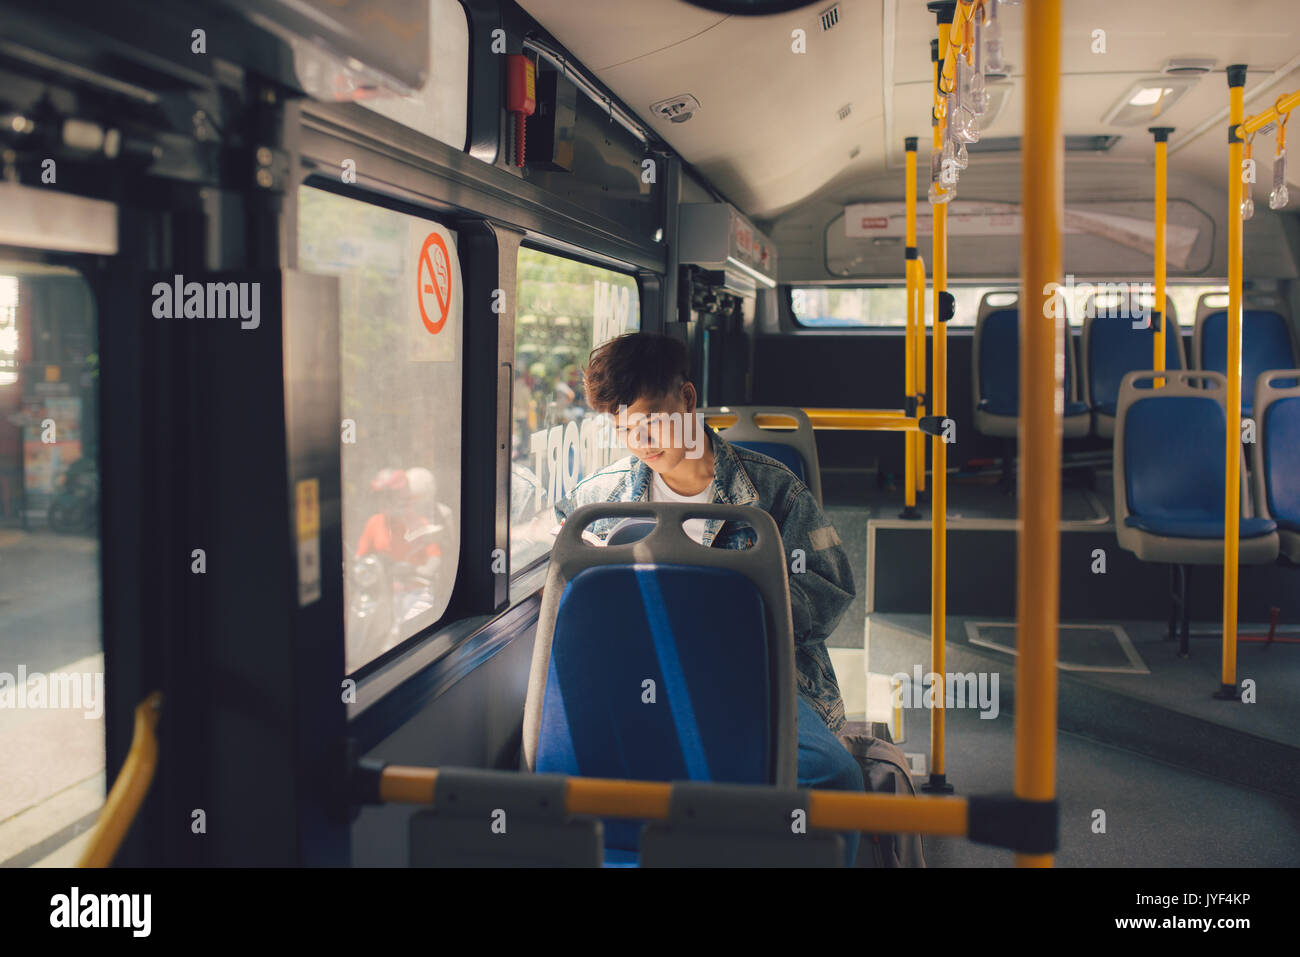 Young man sitting in city bus and reading a book. Stock Photo